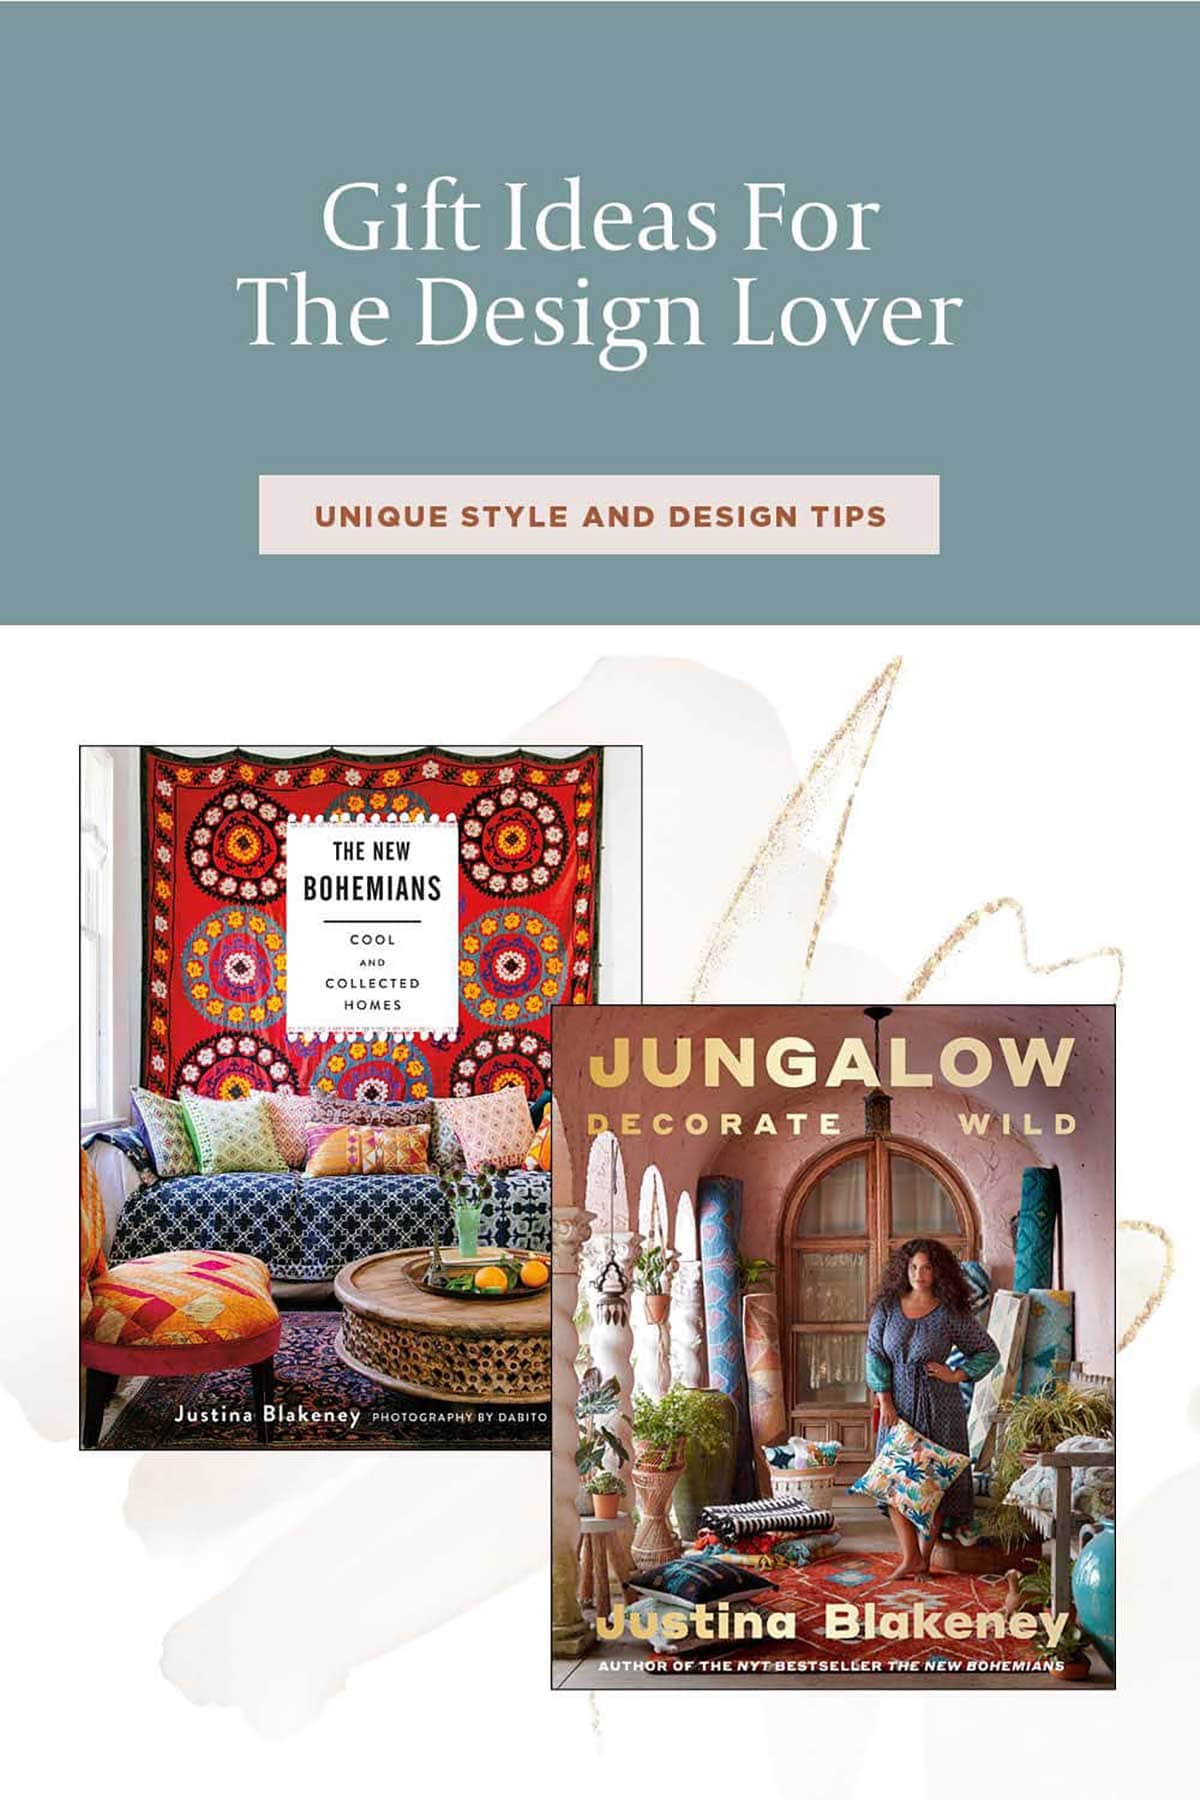 Best Interior Design Books - House Of Hipsters